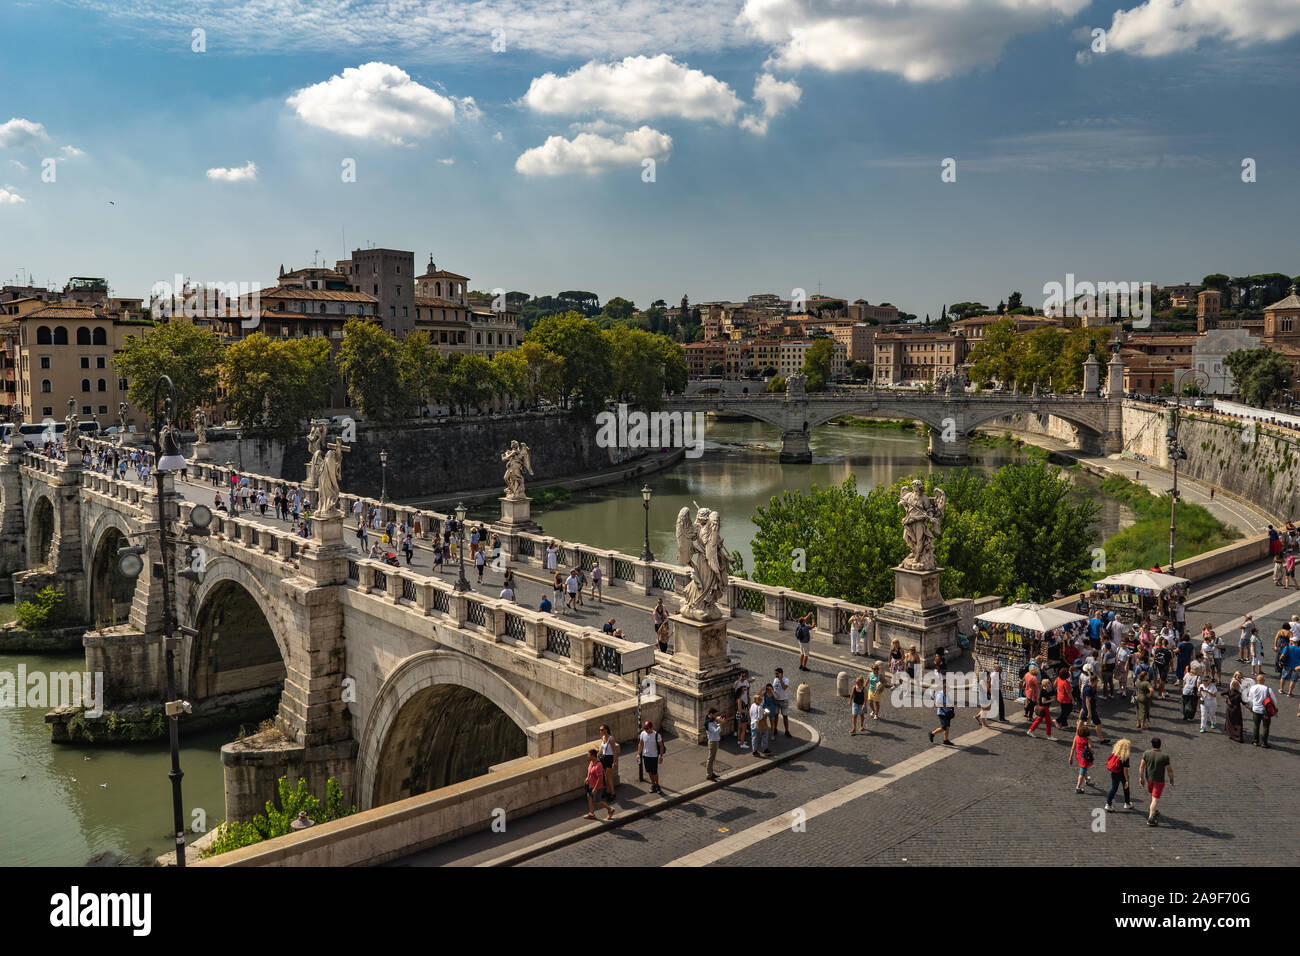 Beautiful view from Castel Sant'Angelo on the bridge, people walking on it and Tiber river. Beautiful sunny weather in Rome, fairytale look like. Stock Photo